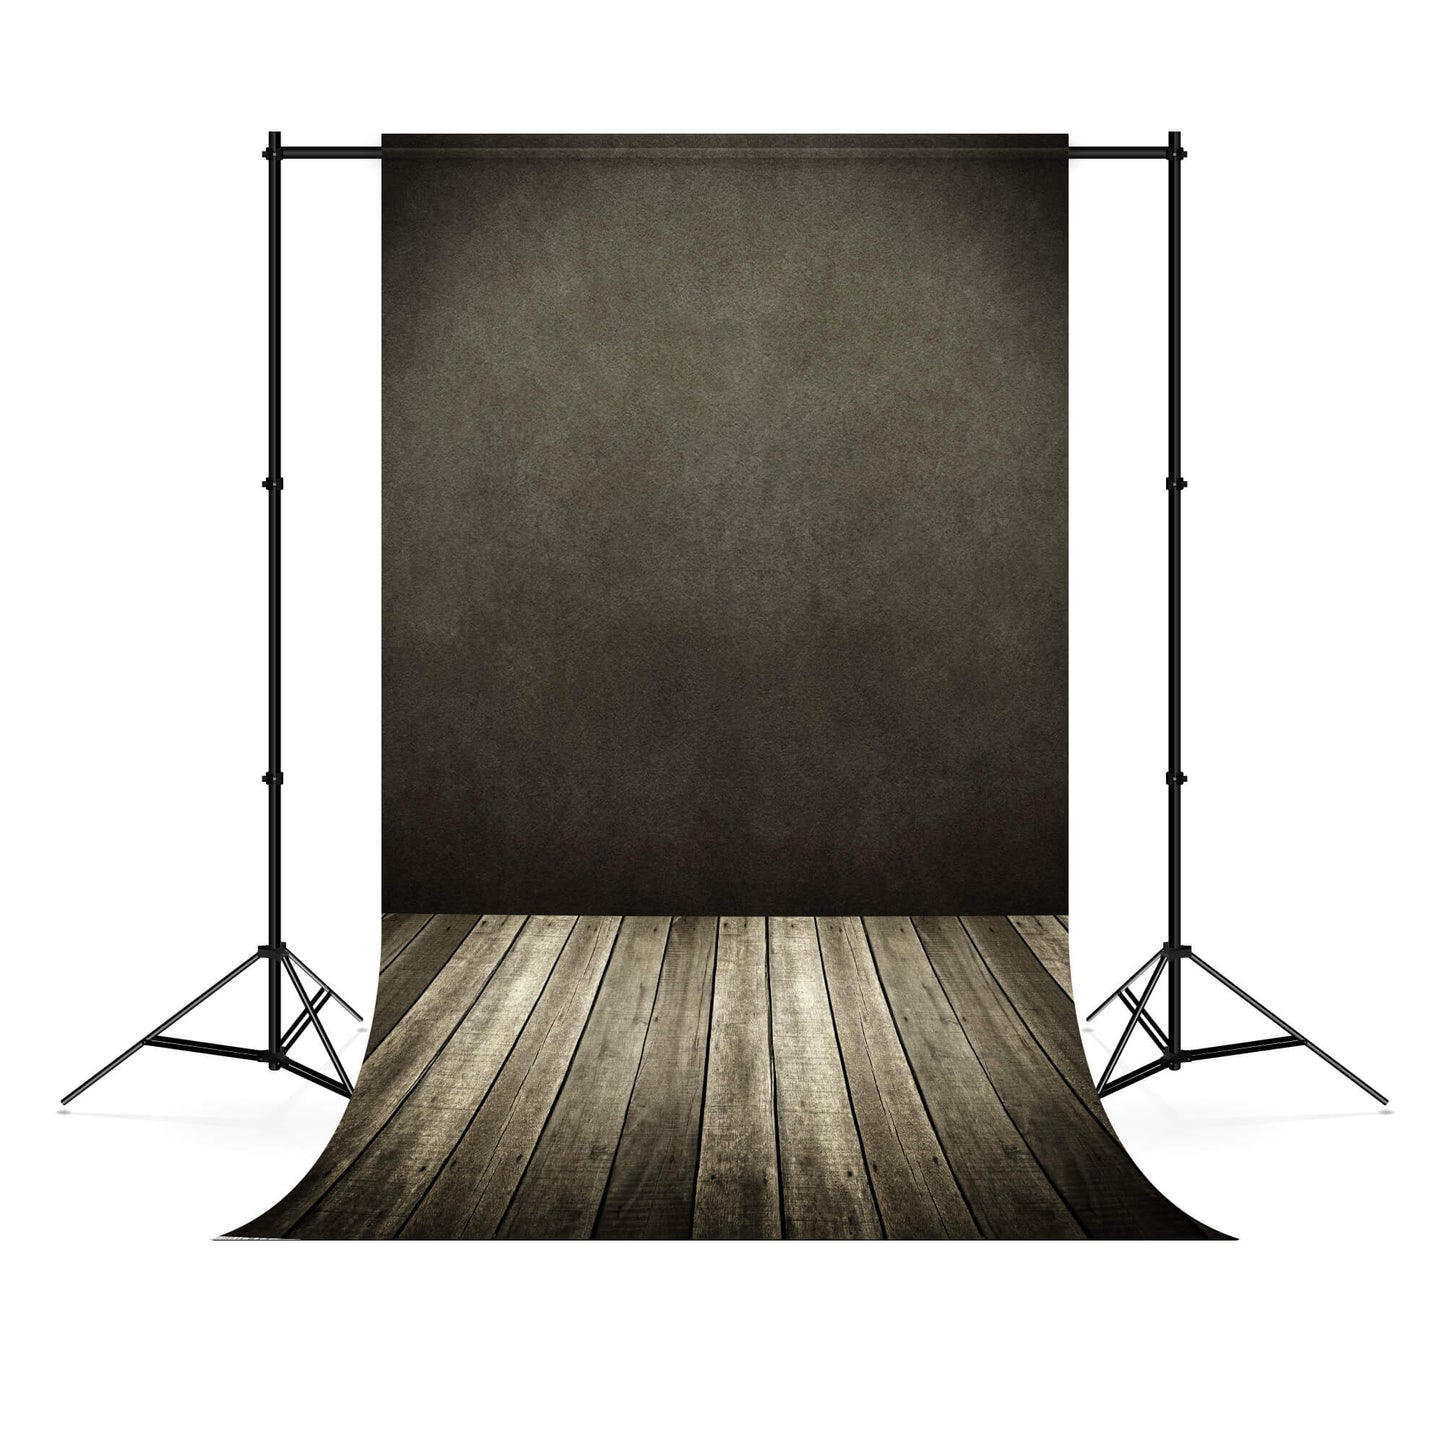 Abstract Cement Wall Texture Wood Floor Backdrop M6-78